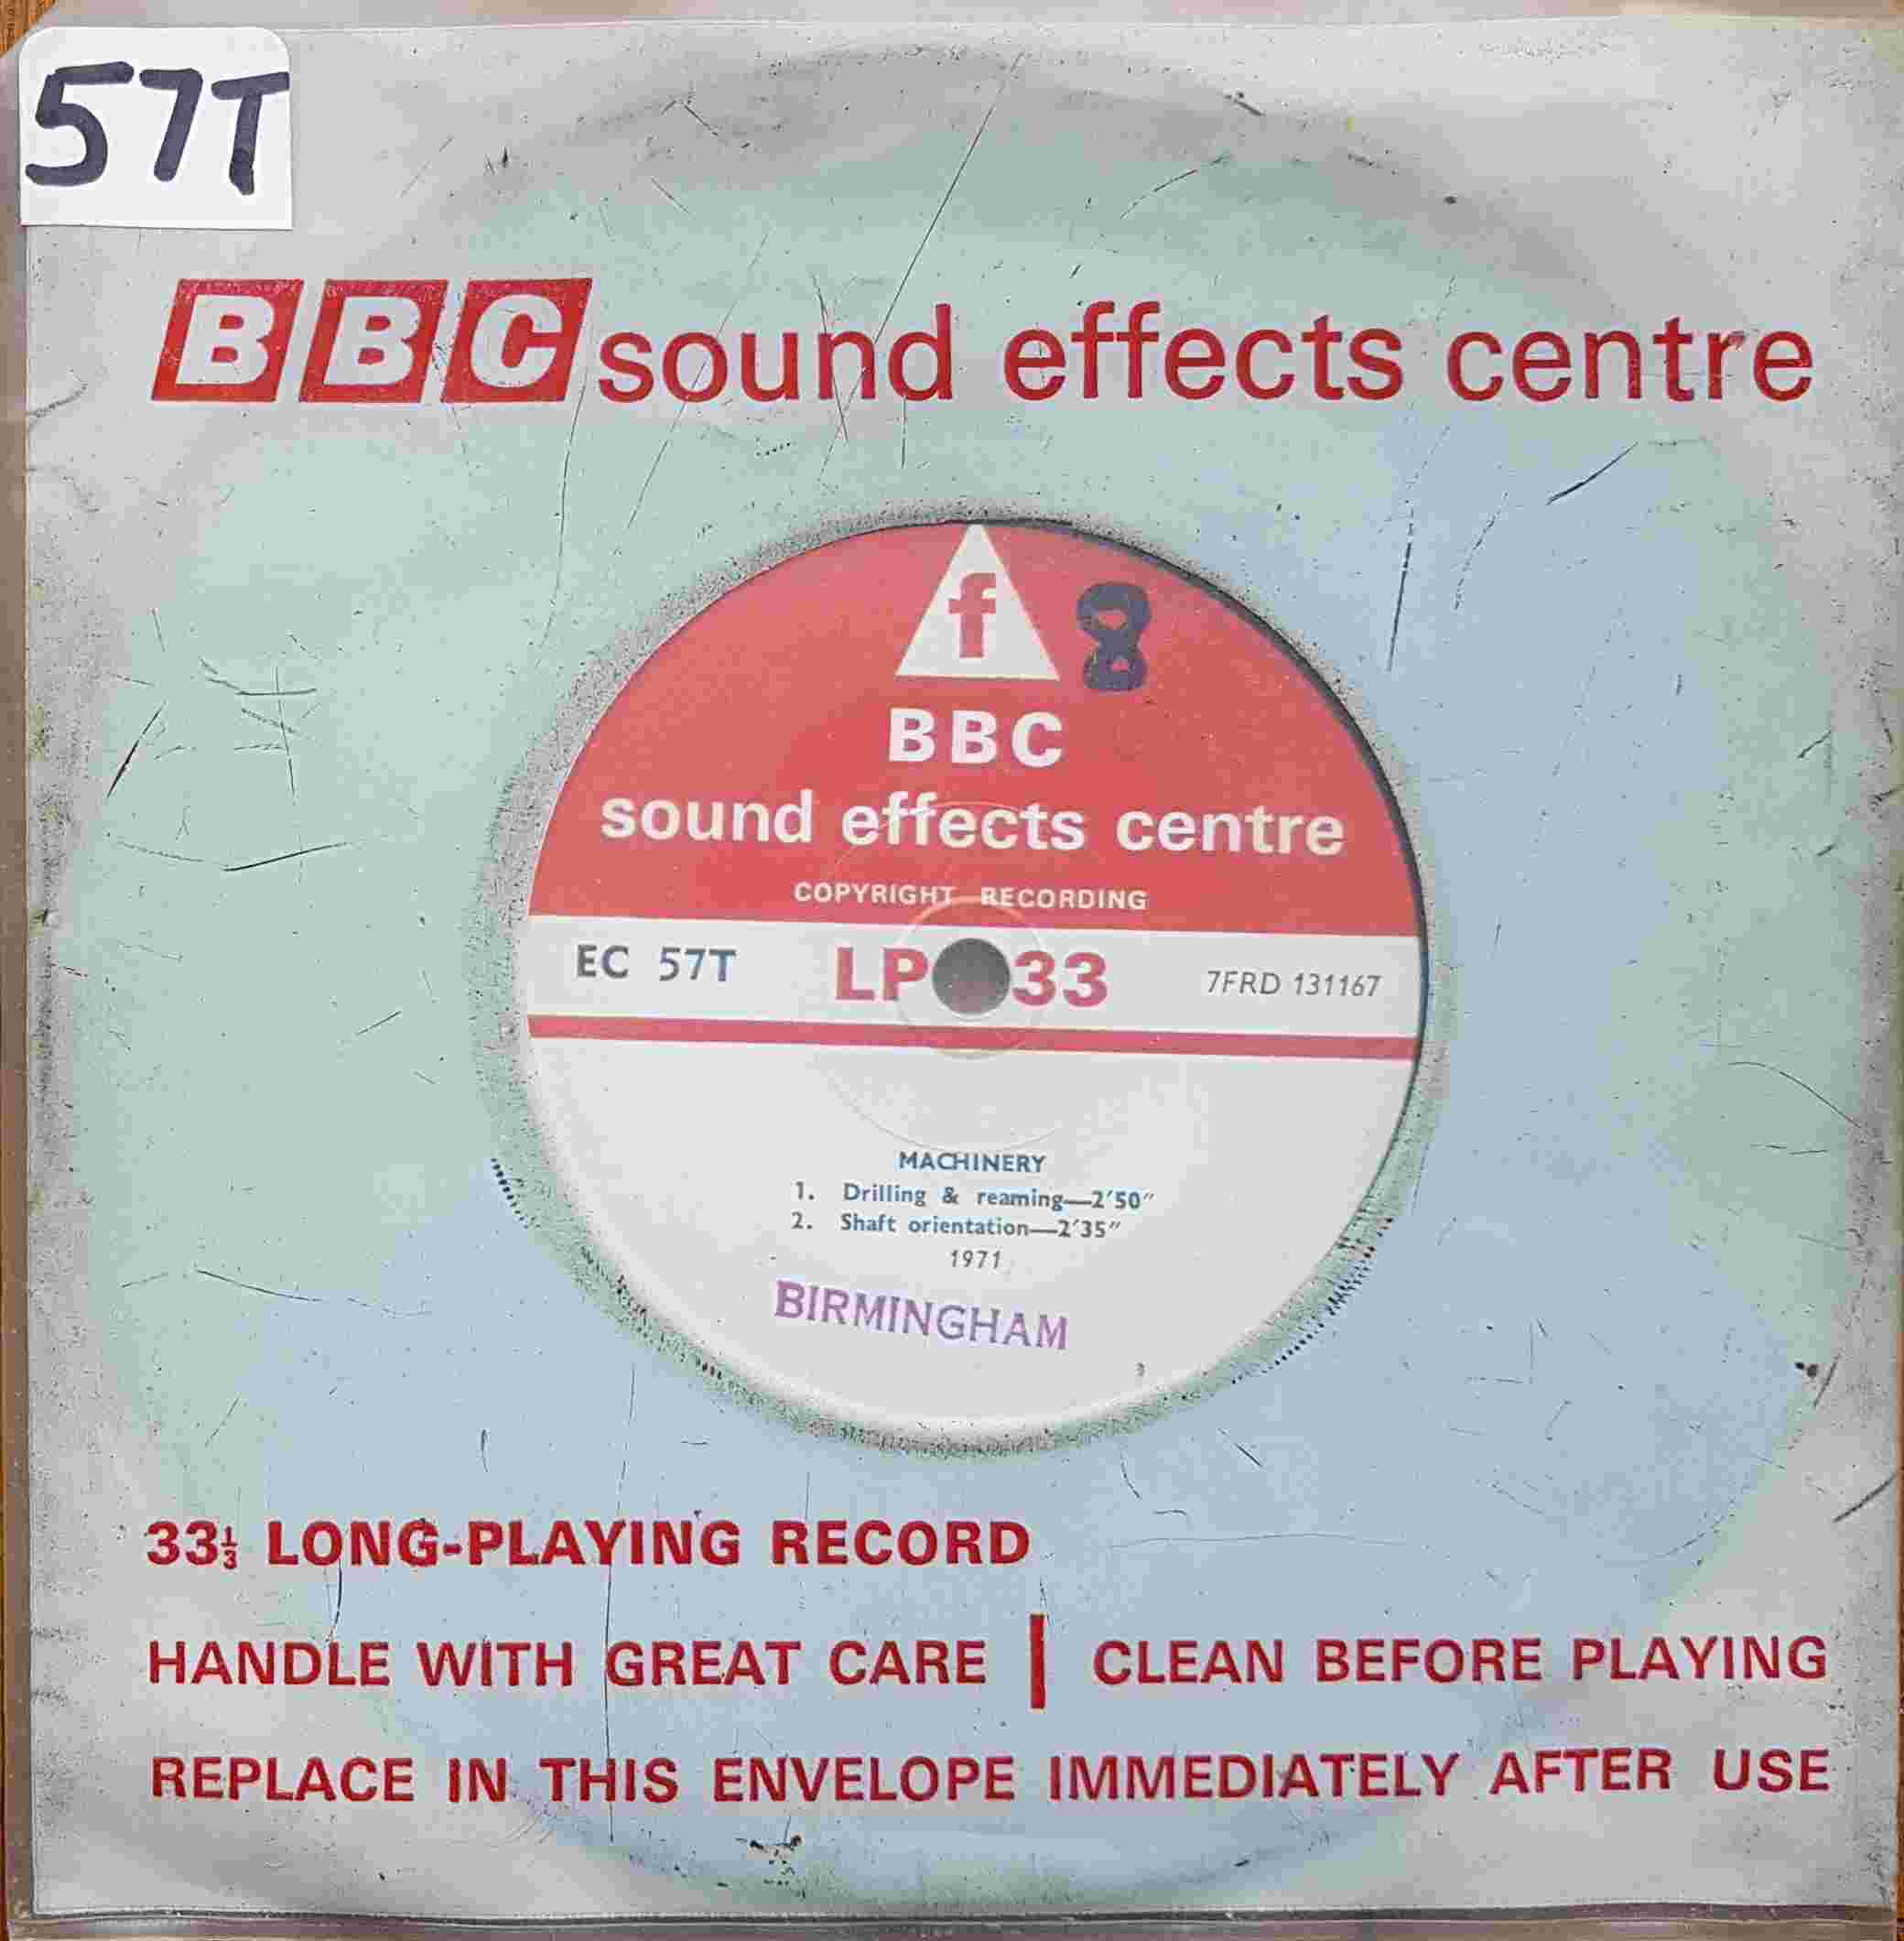 Picture of EC 57T Machinery by artist Not registered from the BBC records and Tapes library